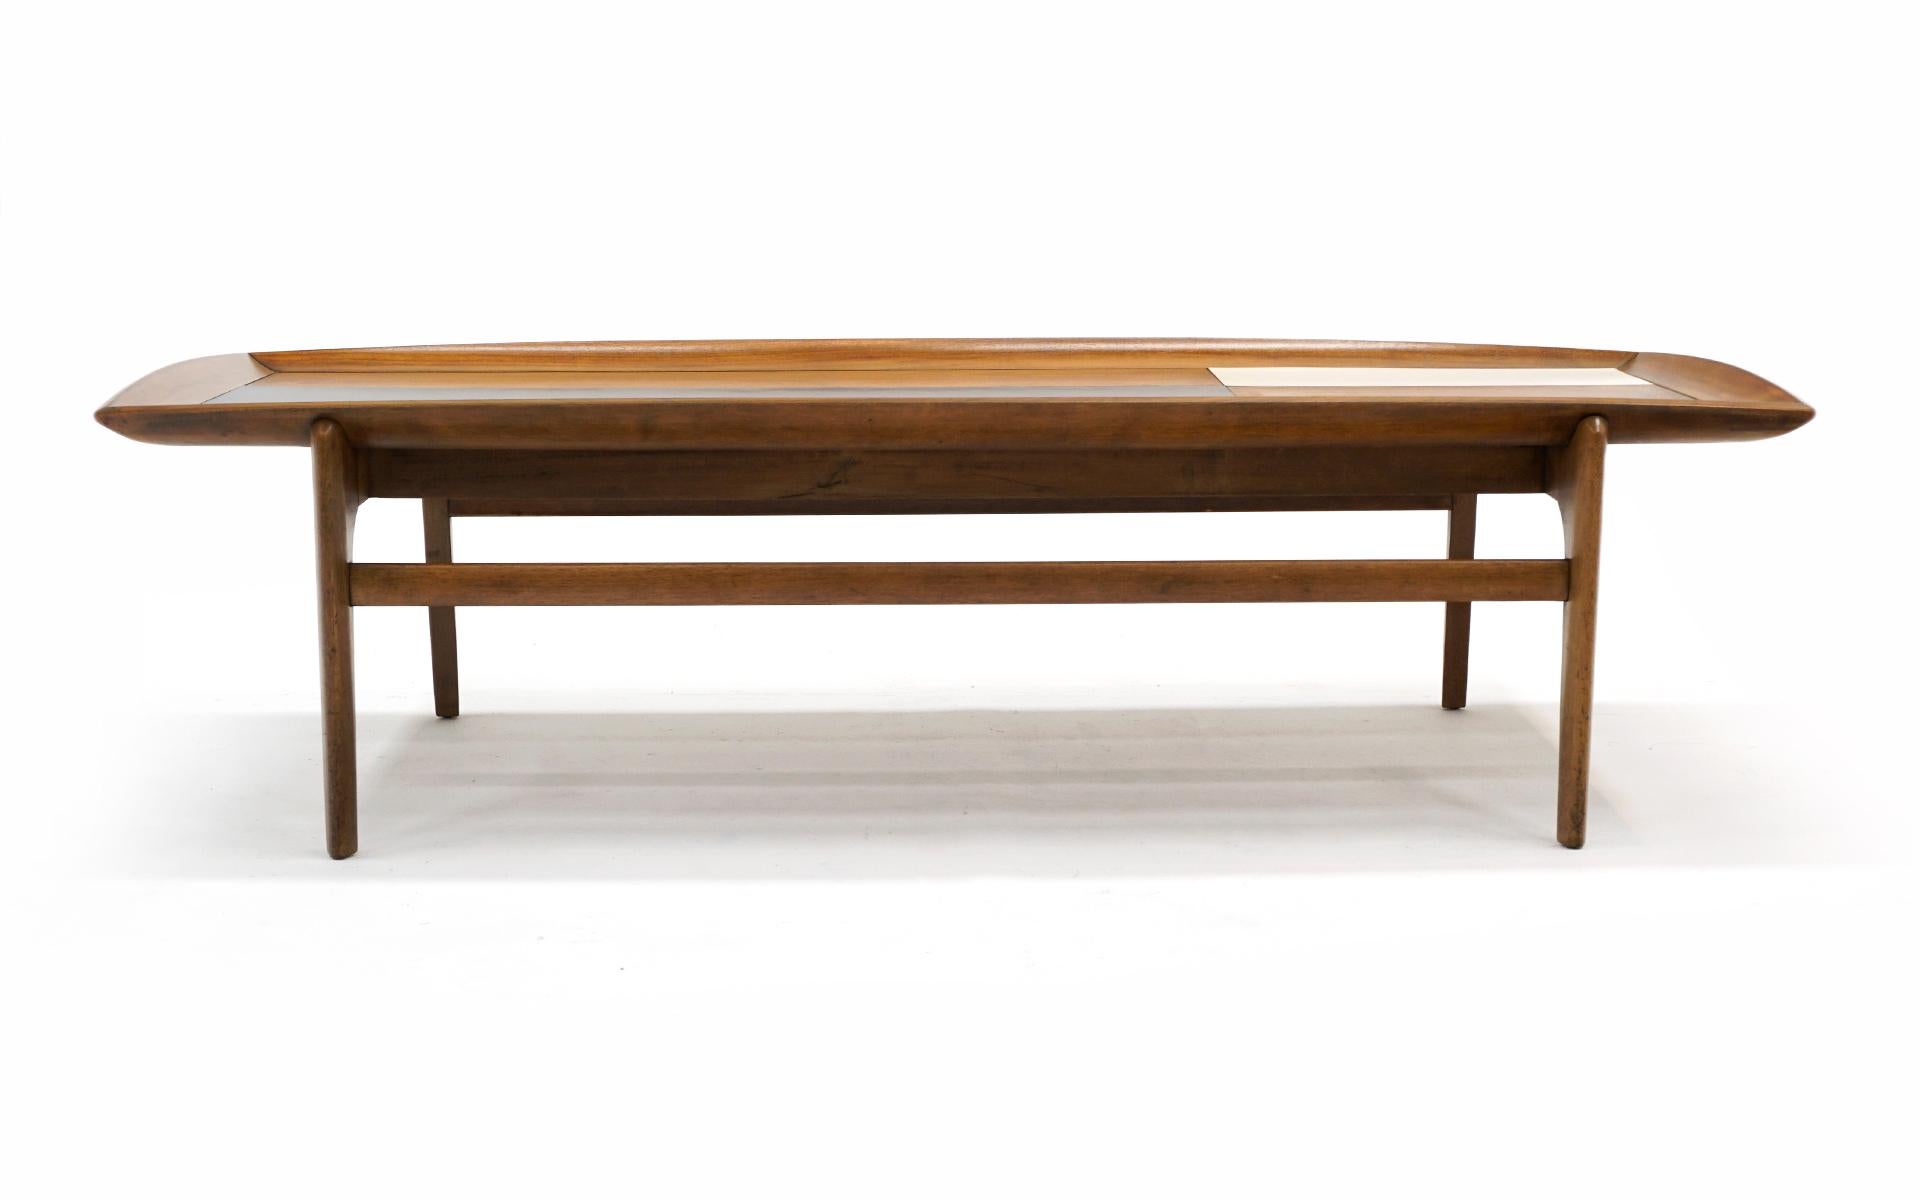 Brown Saltman coffee table in beautiful original condition. Rectangular in shape with white and black lacquered accents. Raised edges and nice sculptural detail on the base. Classic mid century table in it's original untouched condition.